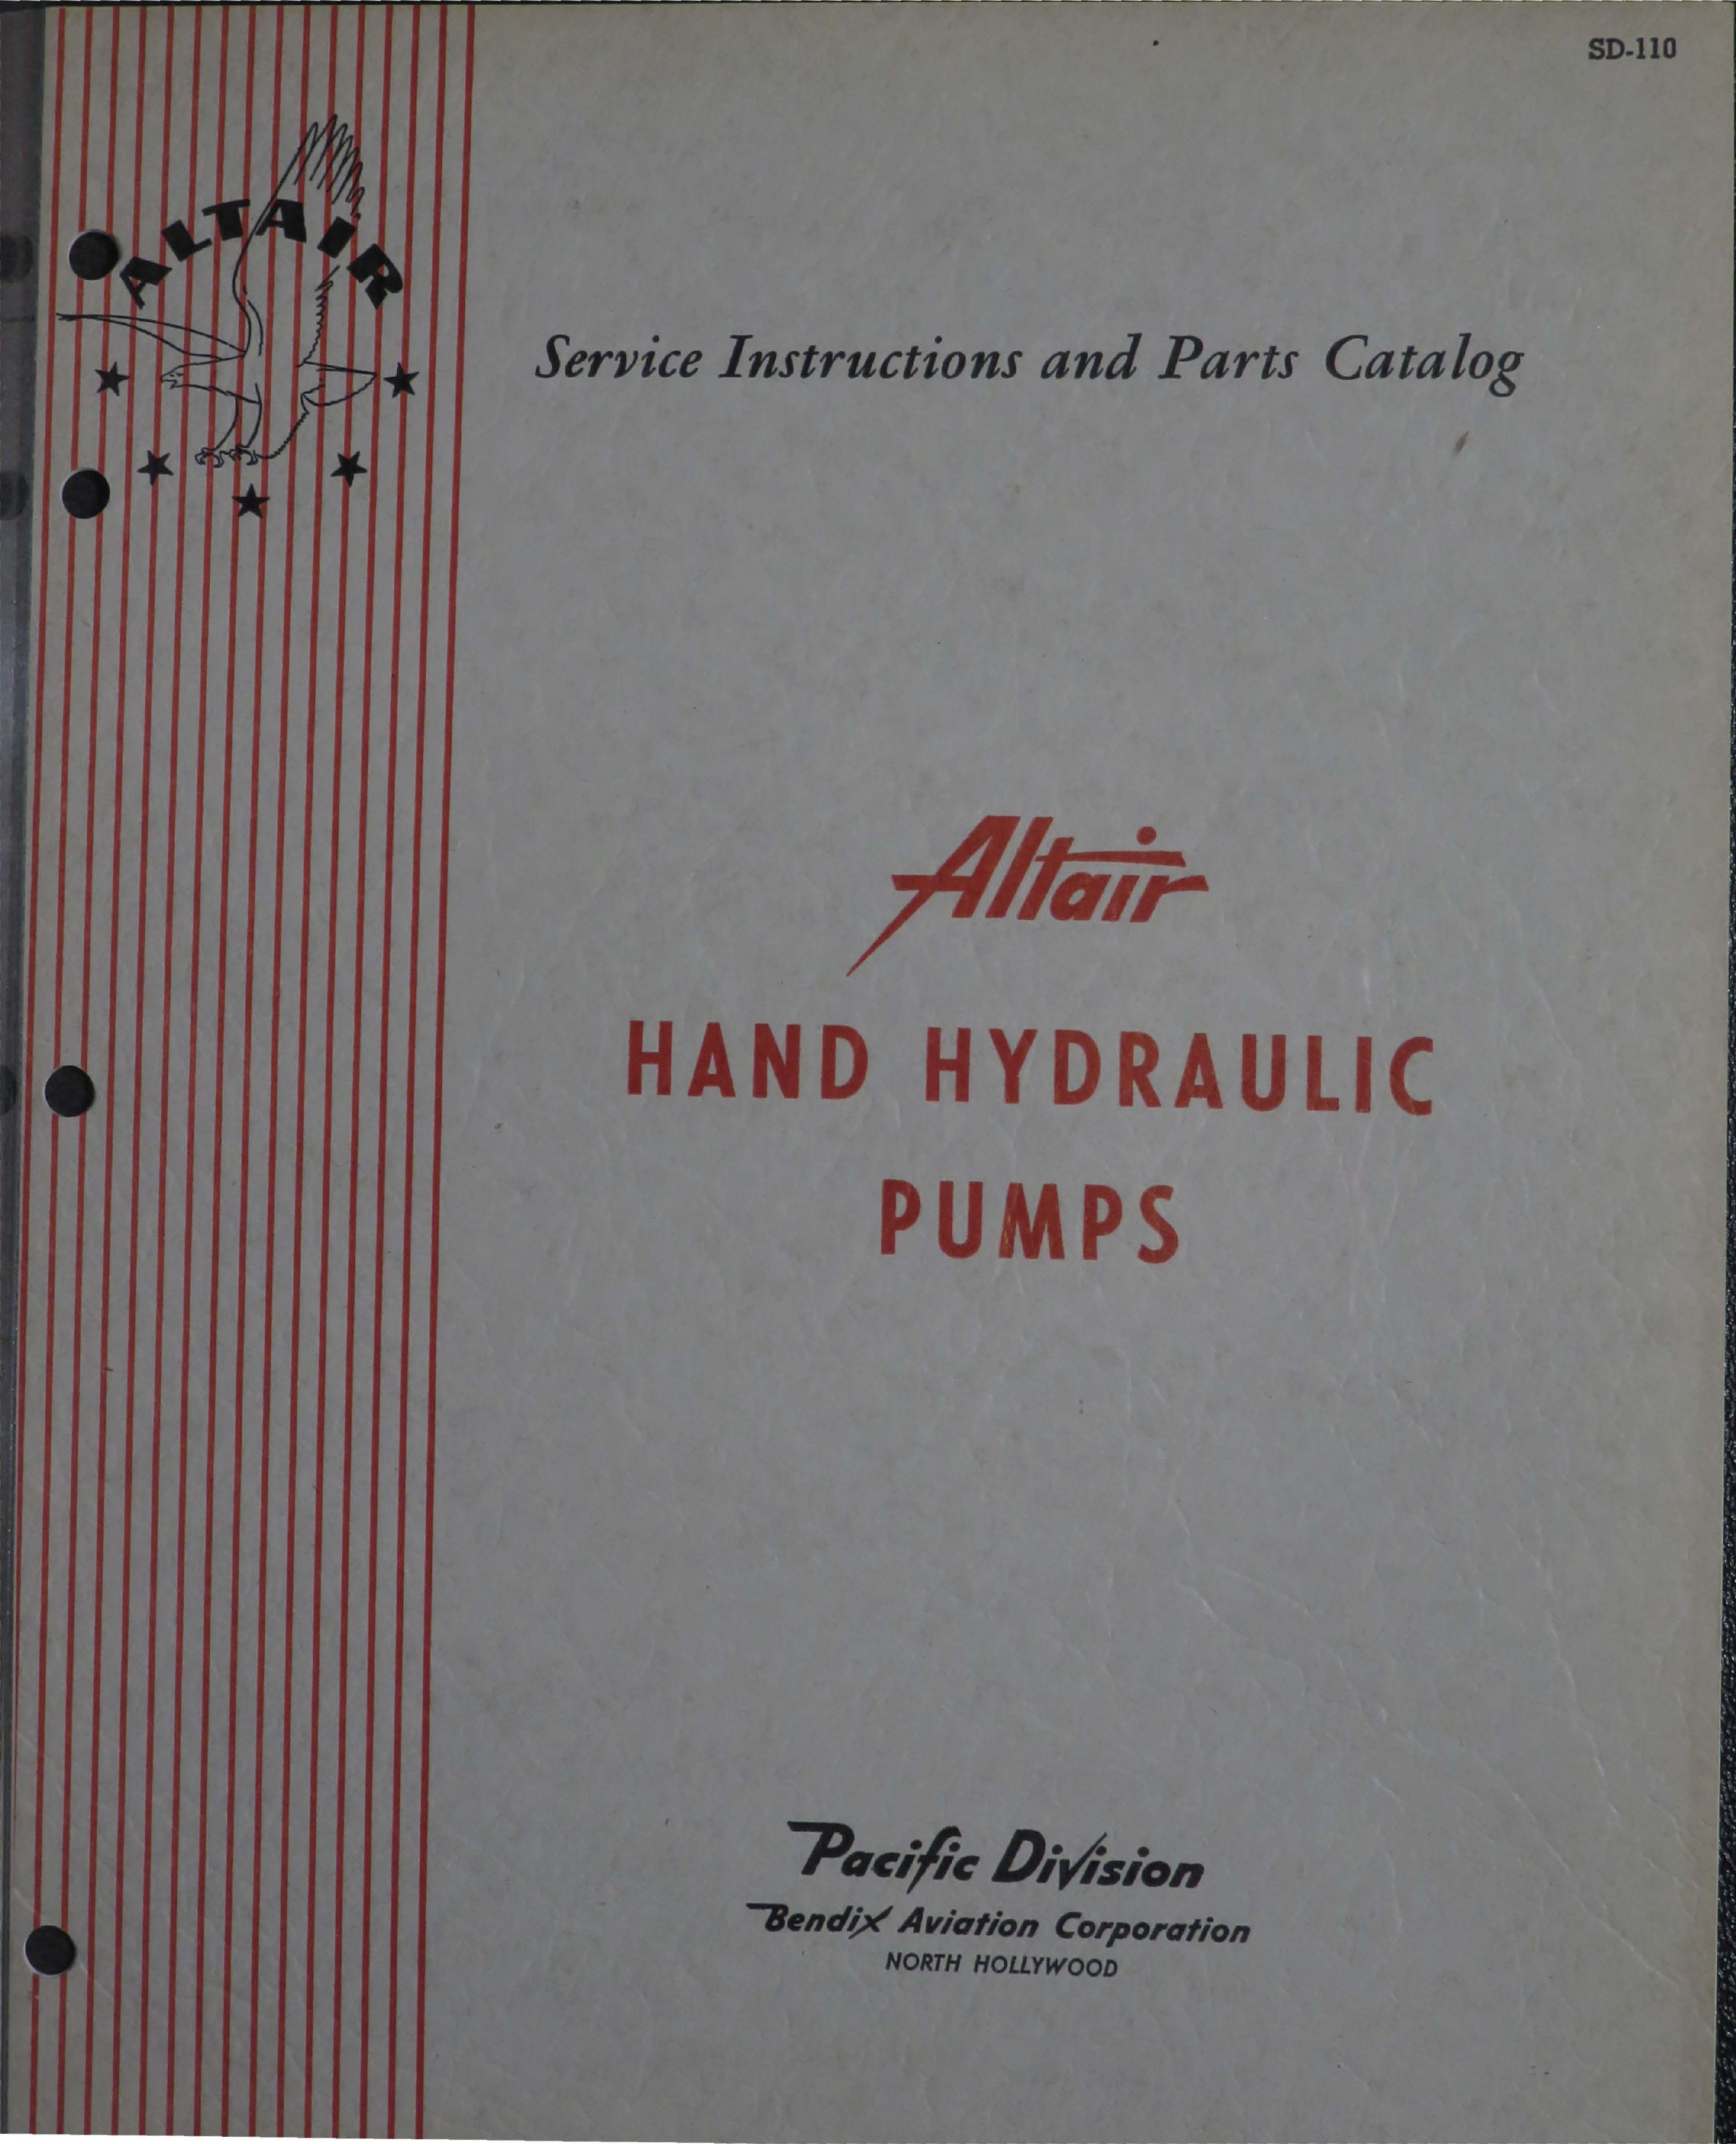 Sample page 1 from AirCorps Library document: Service Instructions with Parts Catalog for Altair Hydraulic Pumps